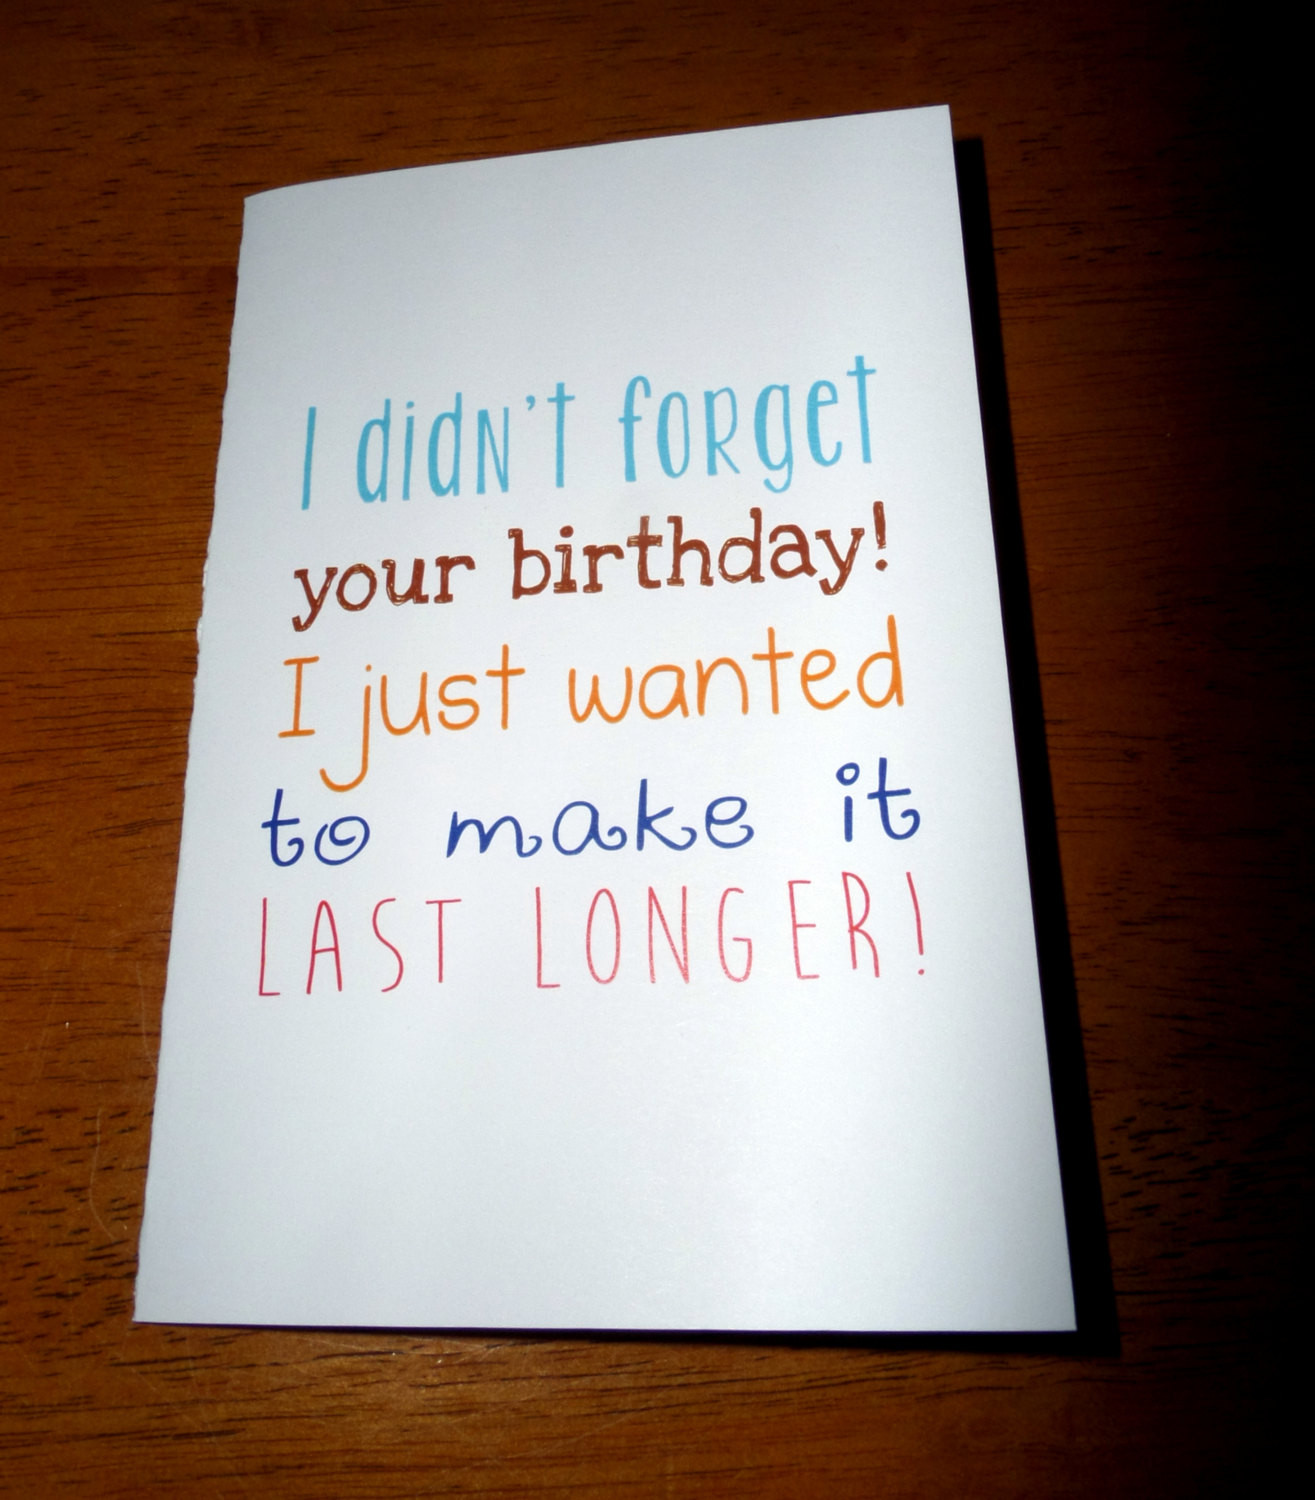 Funny Belated Birthday Quotes
 Funny Belated Birthday Card I Didn t For Your